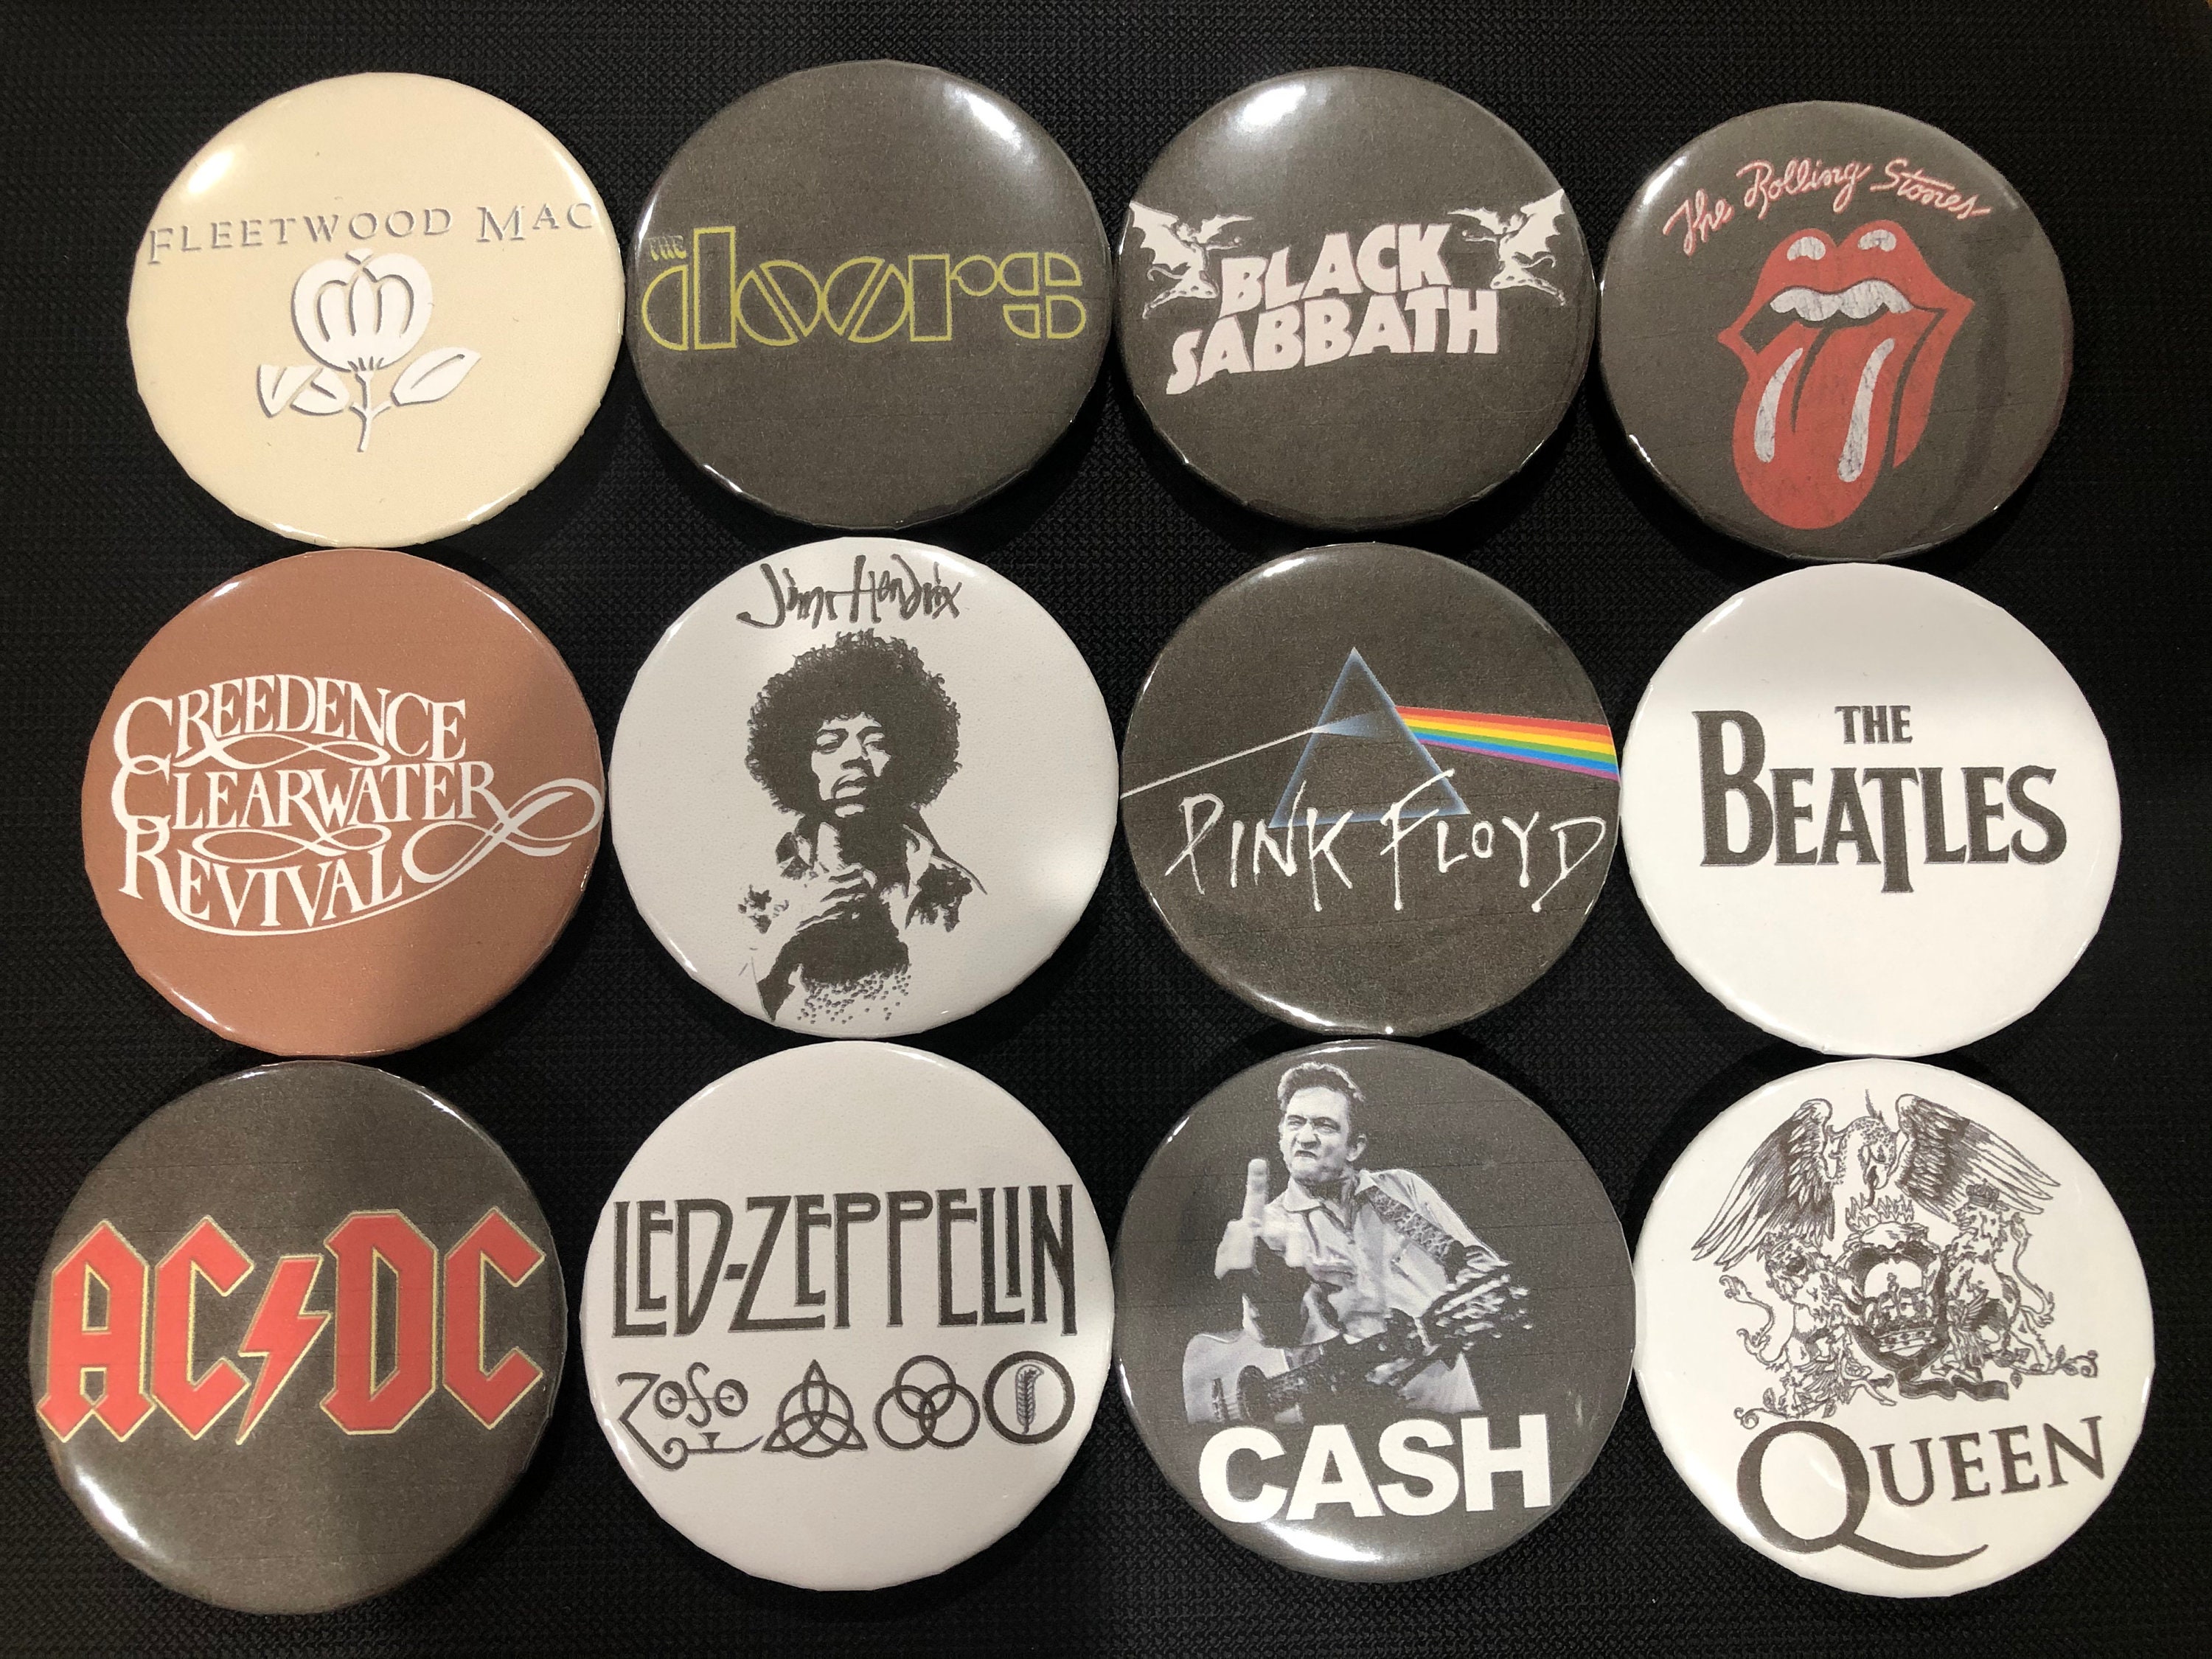 Lot #101 Lot of Vintage Rock Band Pins/Buttons - Bay Area Online Auctions